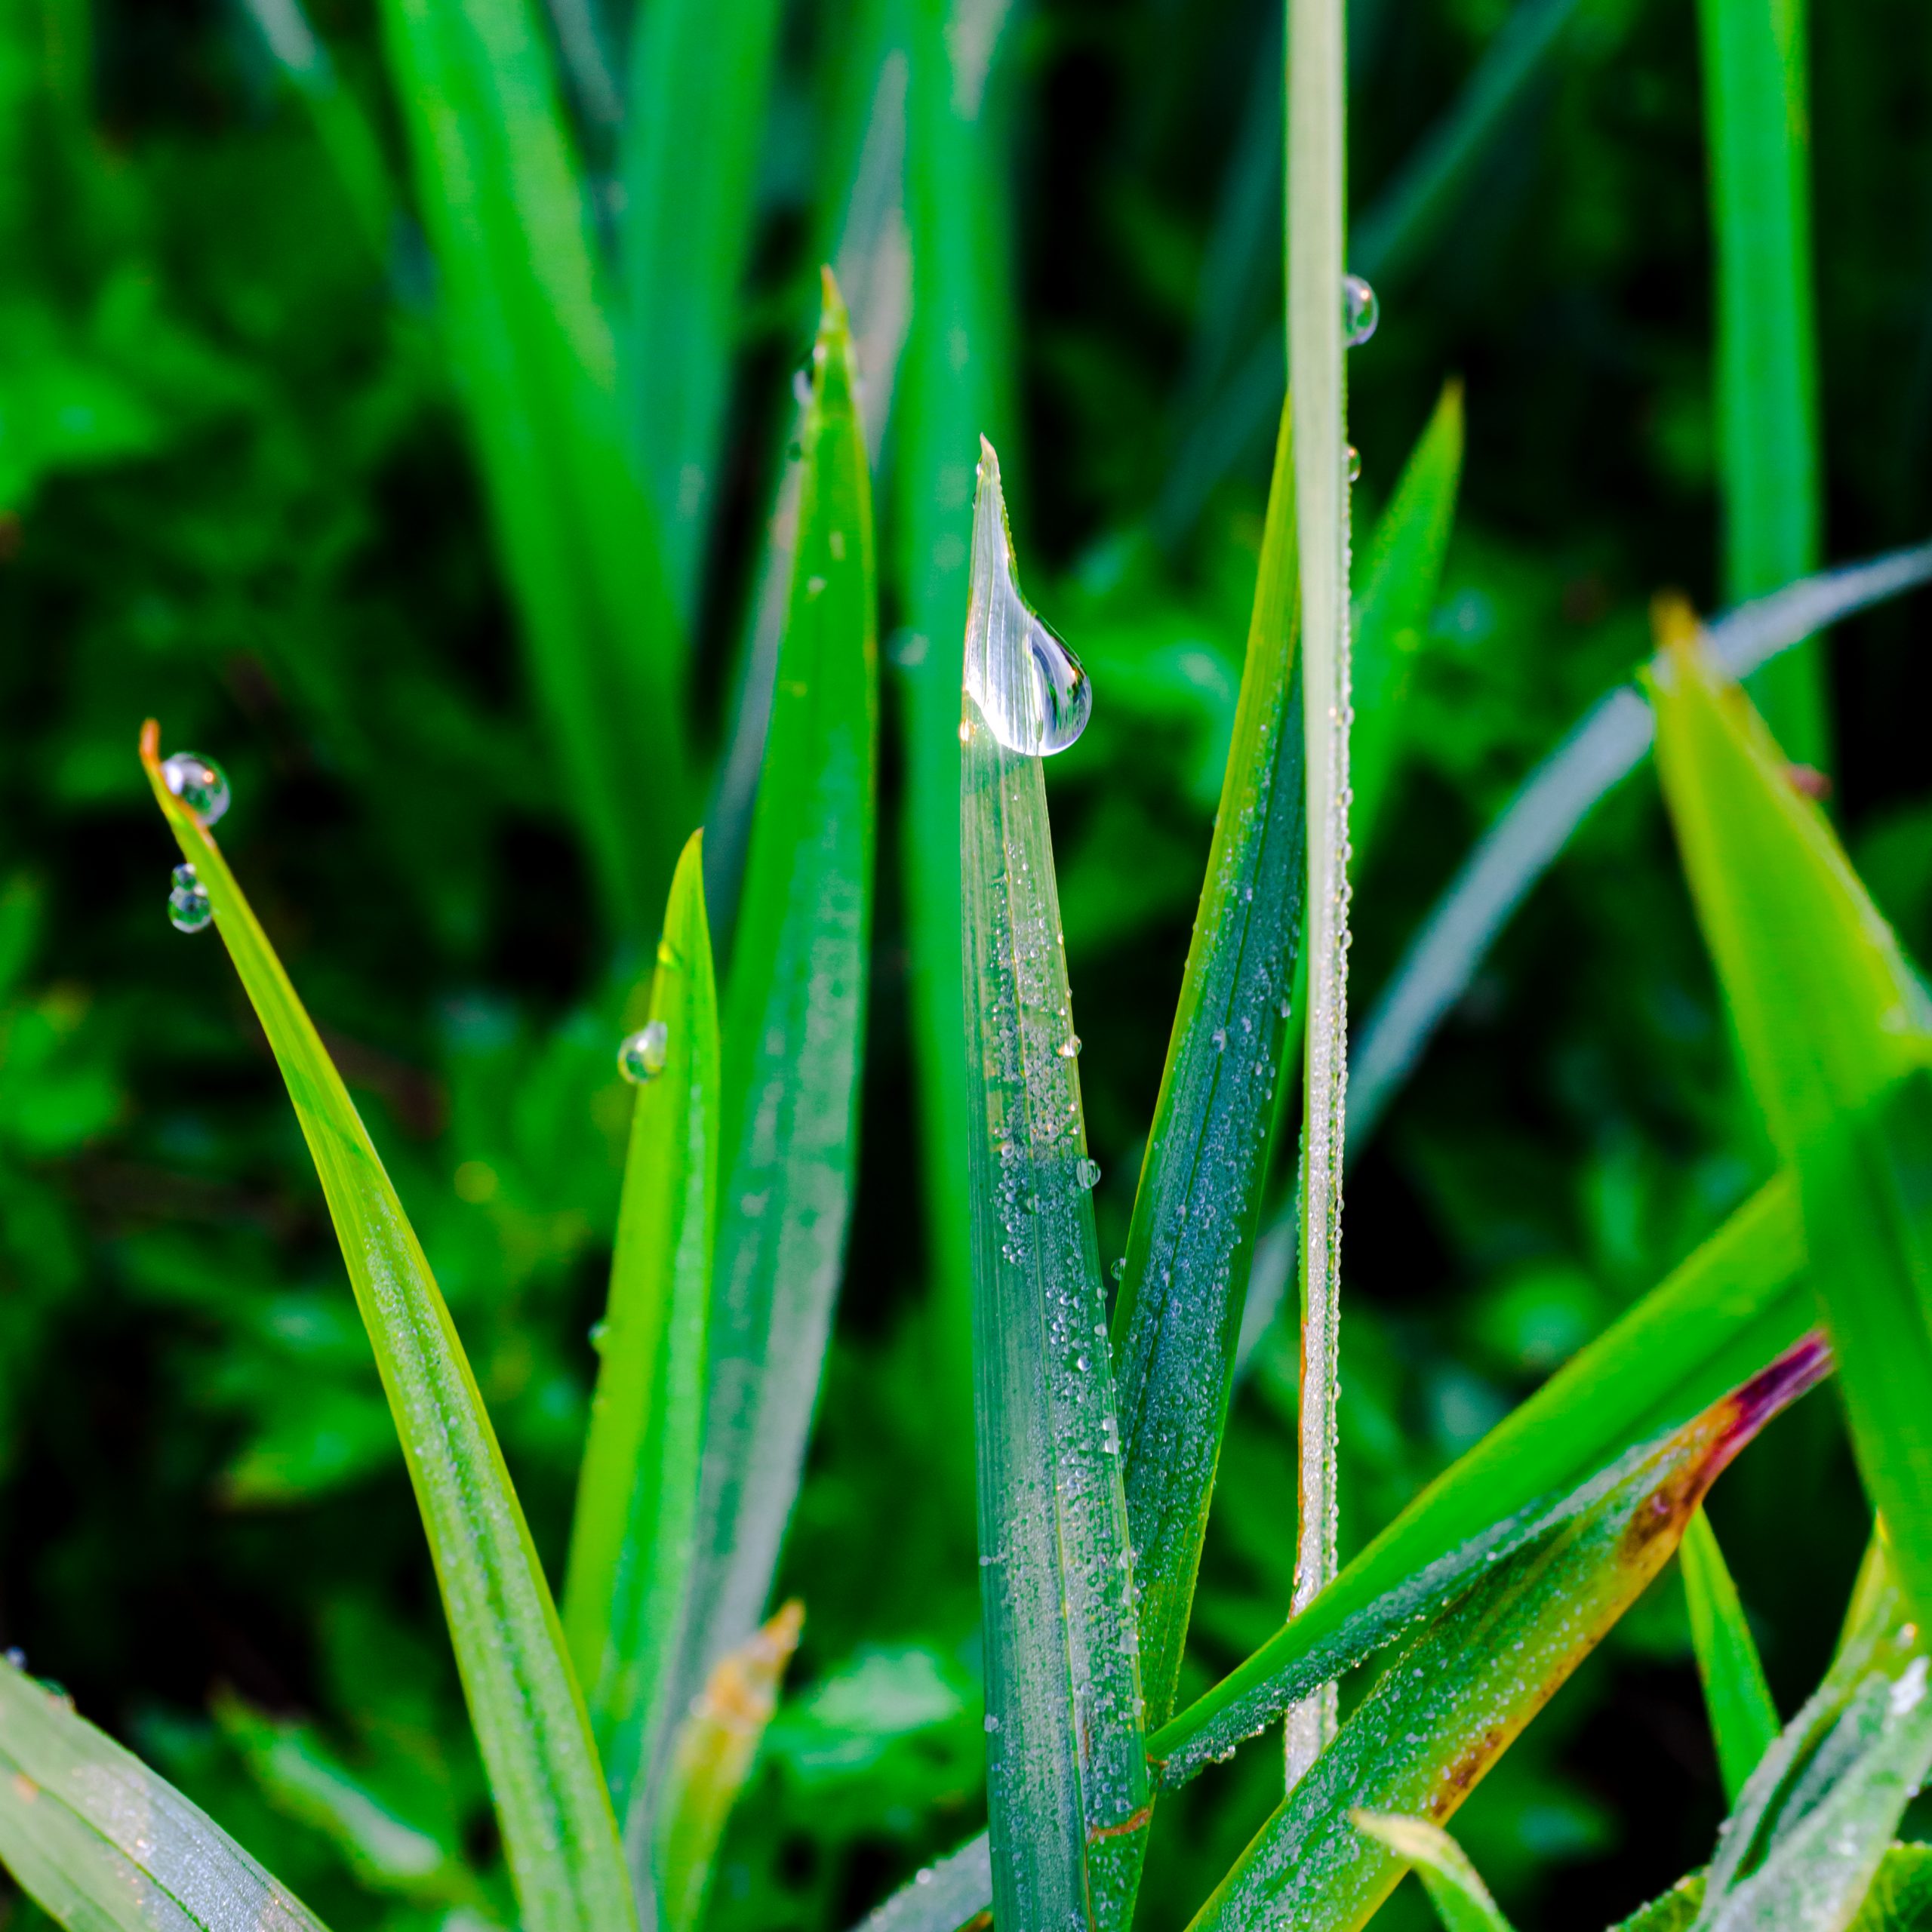 Water drops on grass leaves